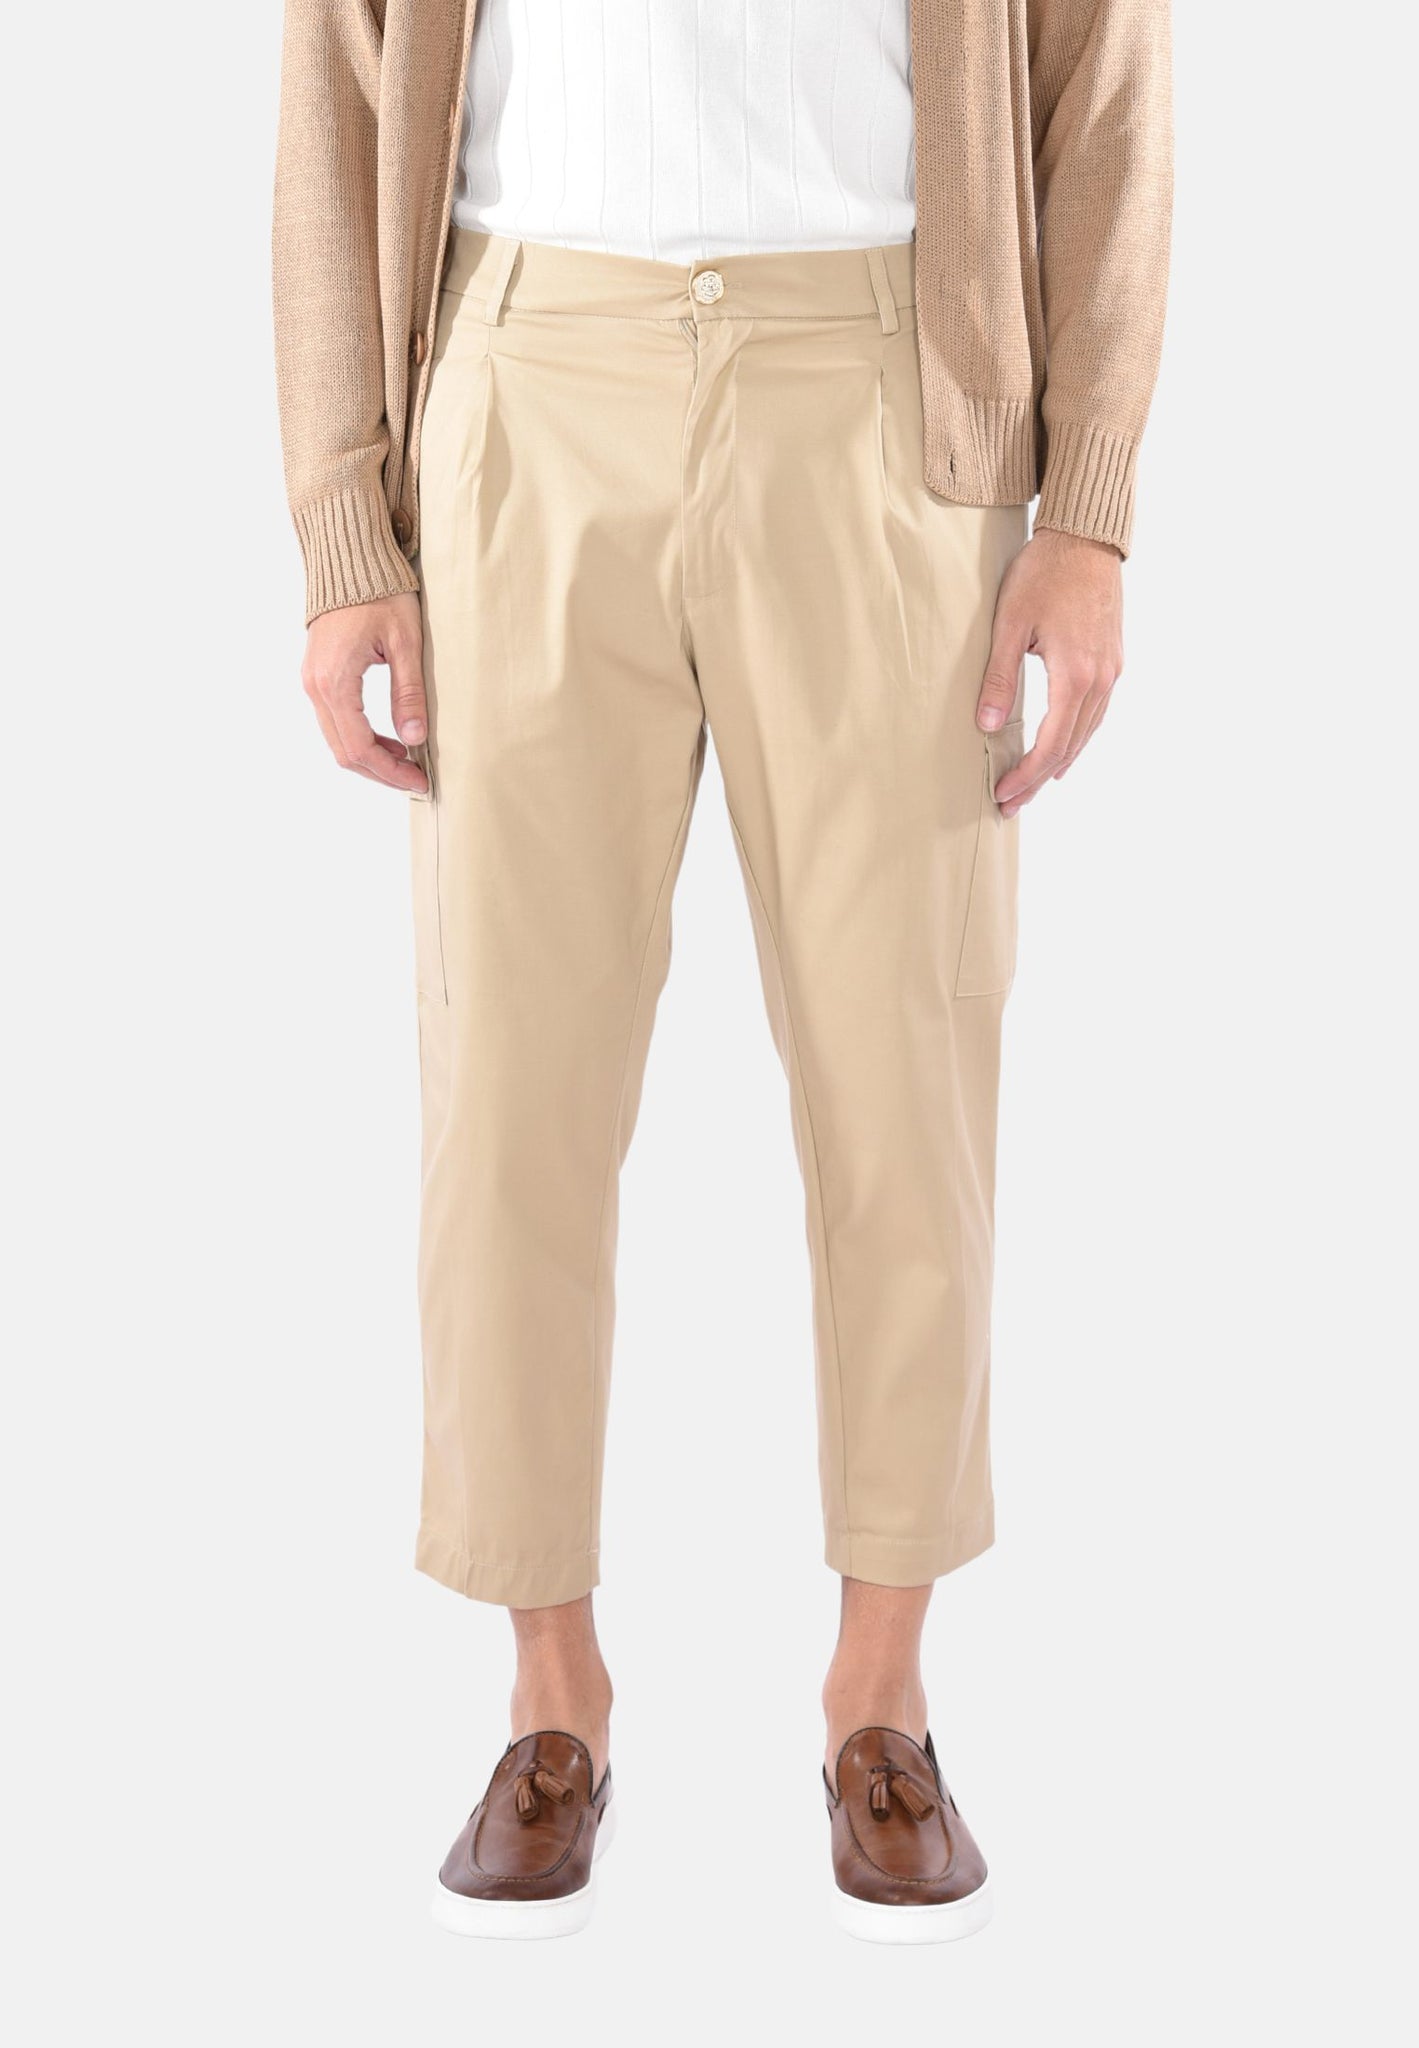 Cropped cargo pants